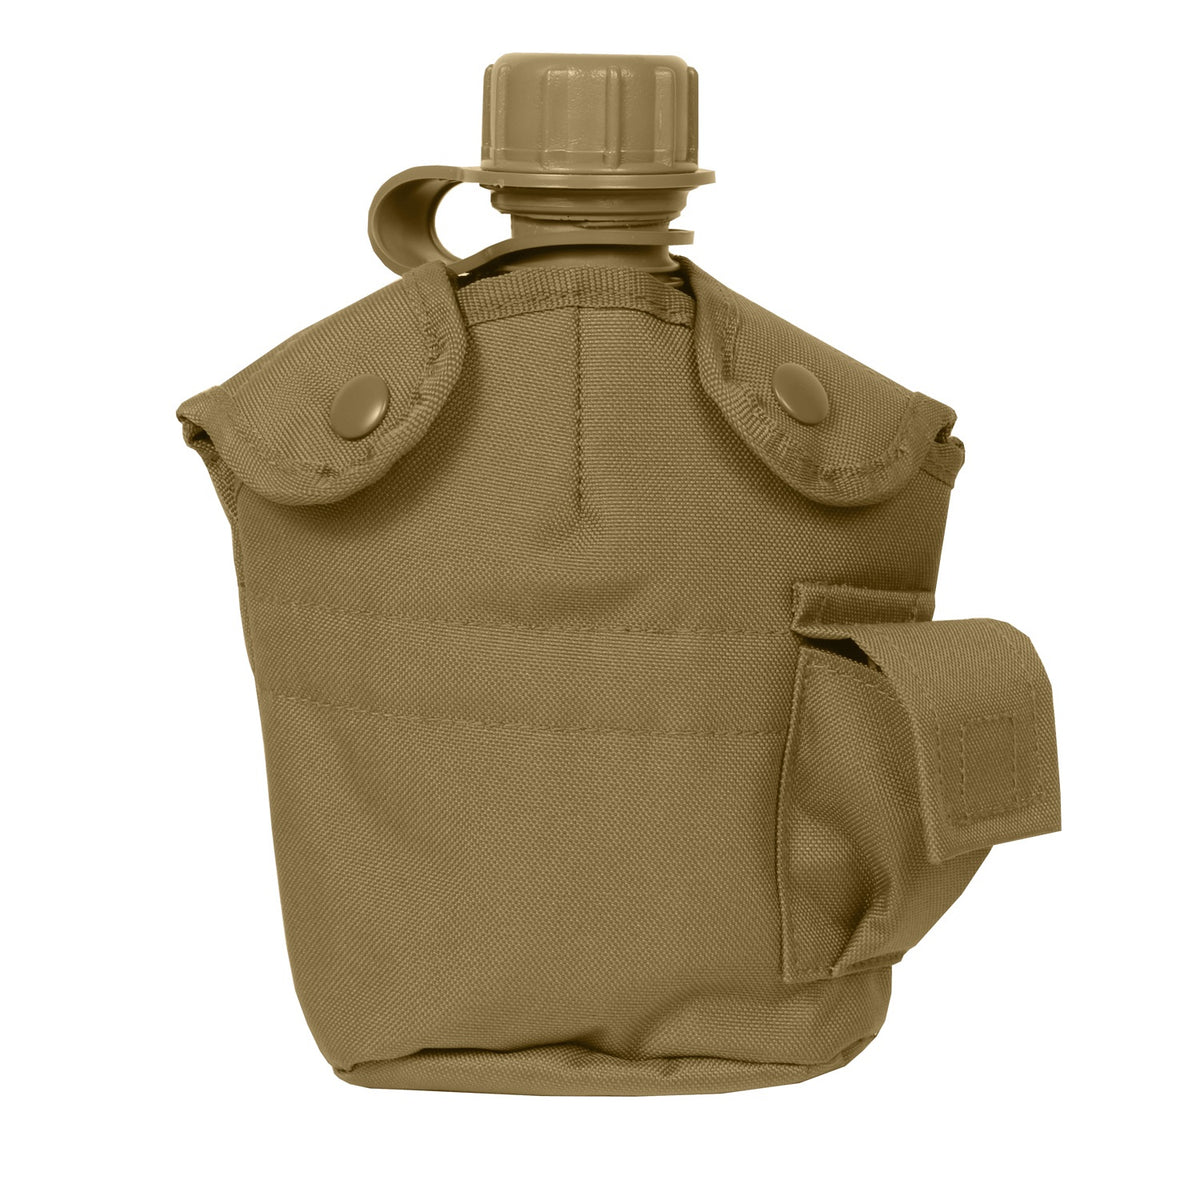 Rothco GI Style MOLLE Canteen Cover Coyote Brown